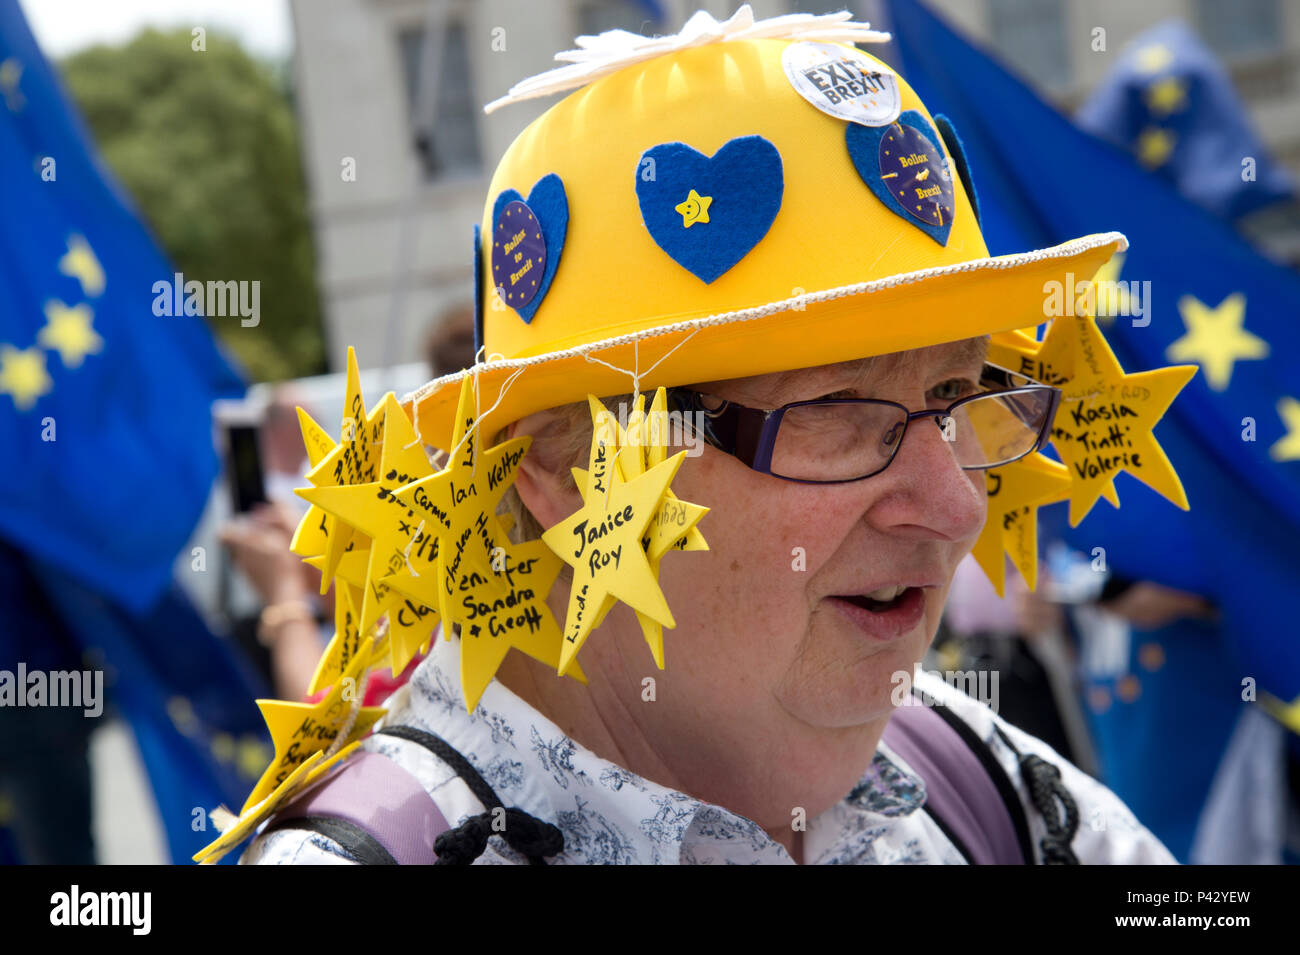 London, UK. 20 June 2018. Protesters outside  Parliament, Westminster, London as Members of Parliament debate the European Union withdrawal bill, June 20th 2018. A woman from Poole, Dorset wears a hat with the names of British ex patriates living in Spain who were not able to return to Britain to vote in the EU referendum. Credit: Jenny Matthews/Alamy Live News Stock Photo